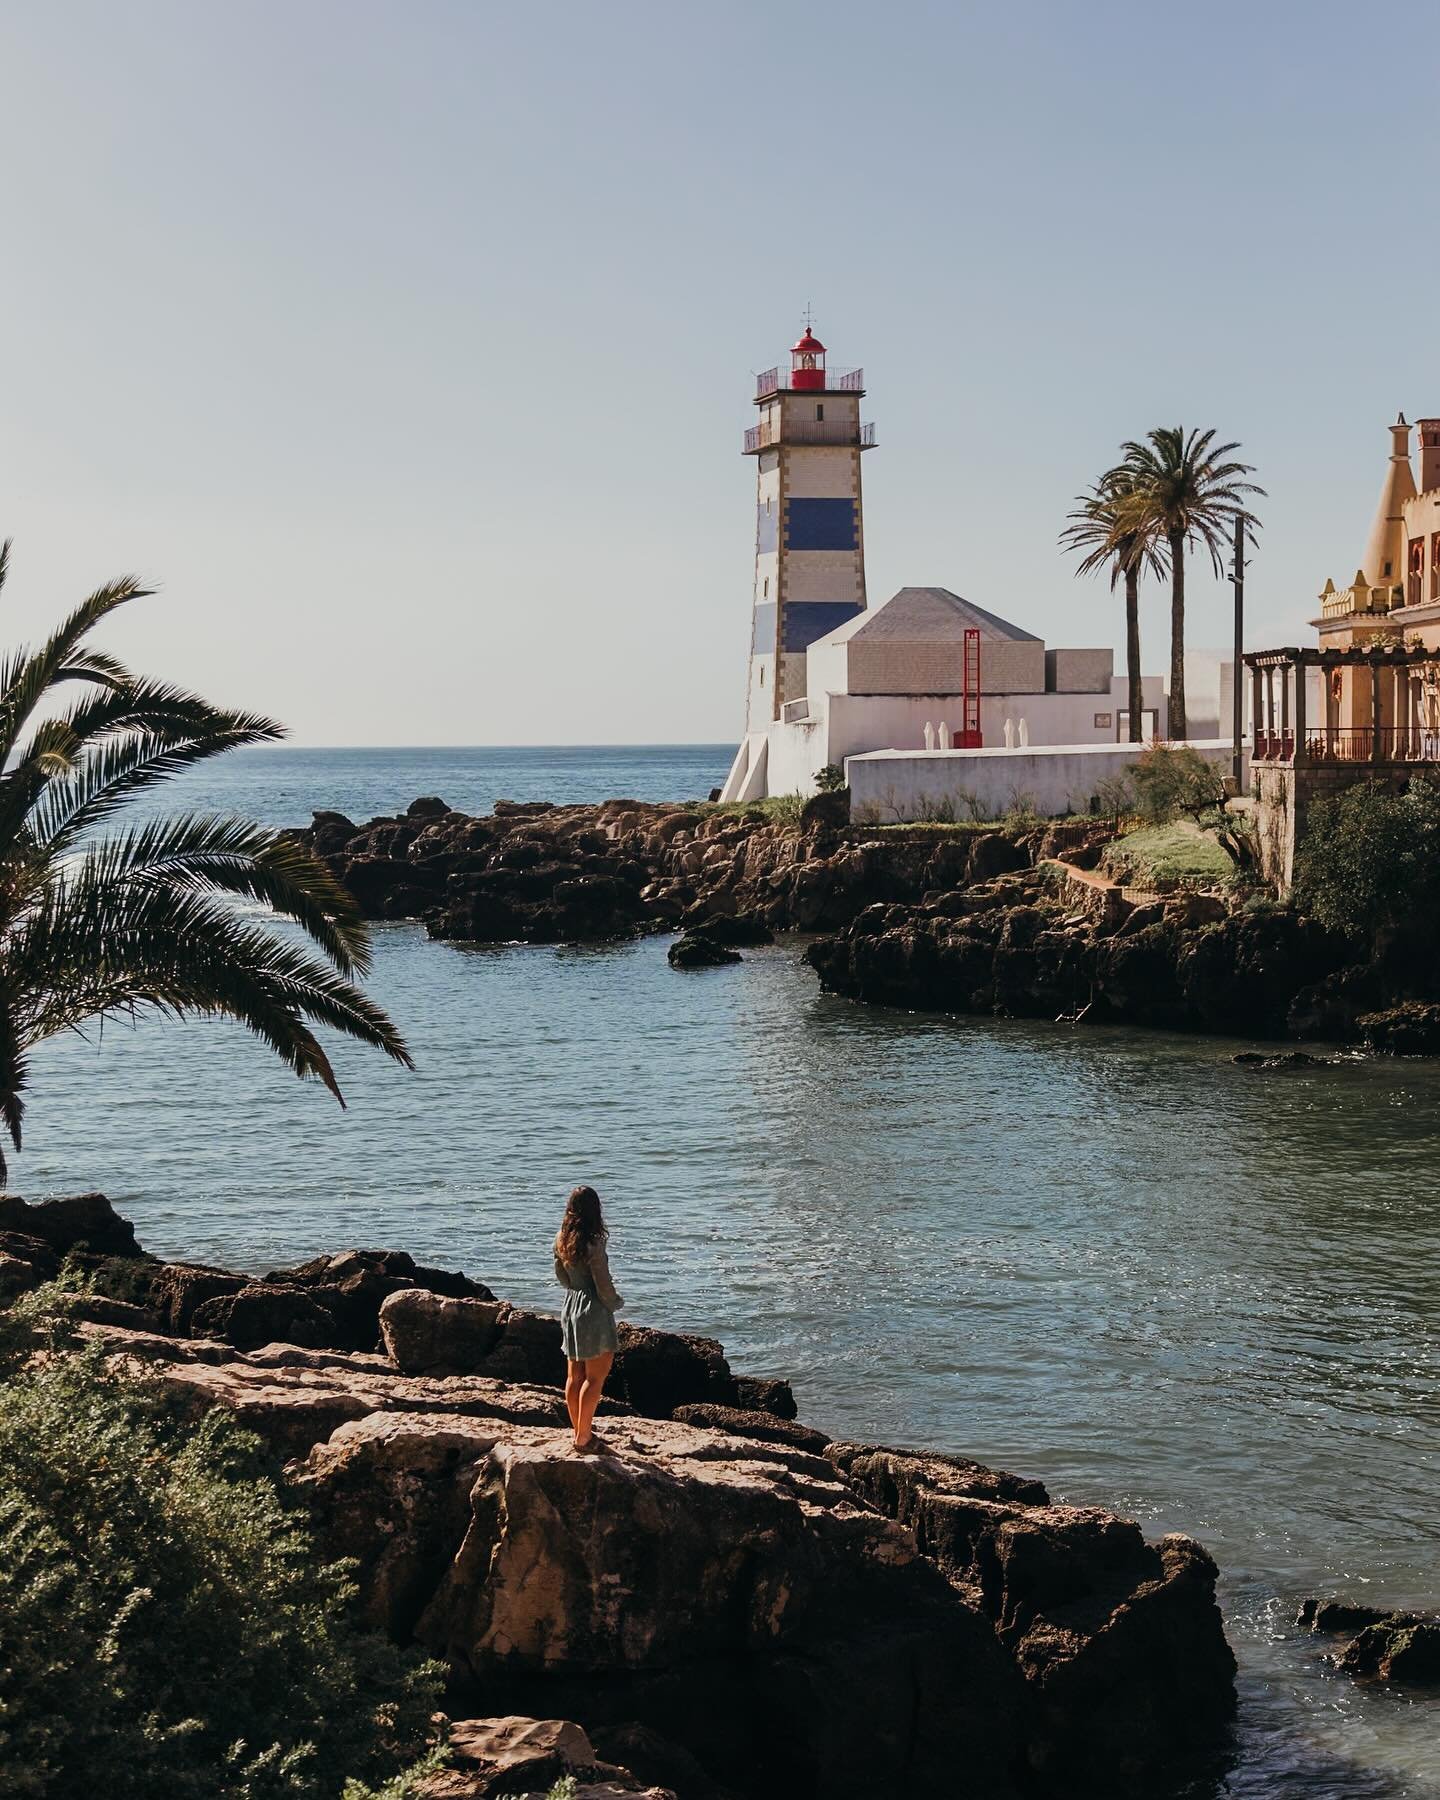 Cascais is a favourite with locals and international visitors looking to explore outside of the capital city of Lisbon with the best of both beautiful beaches and the majestic Sintra Mountains. 

This part of Portugal is rich in cultural heritage, ma